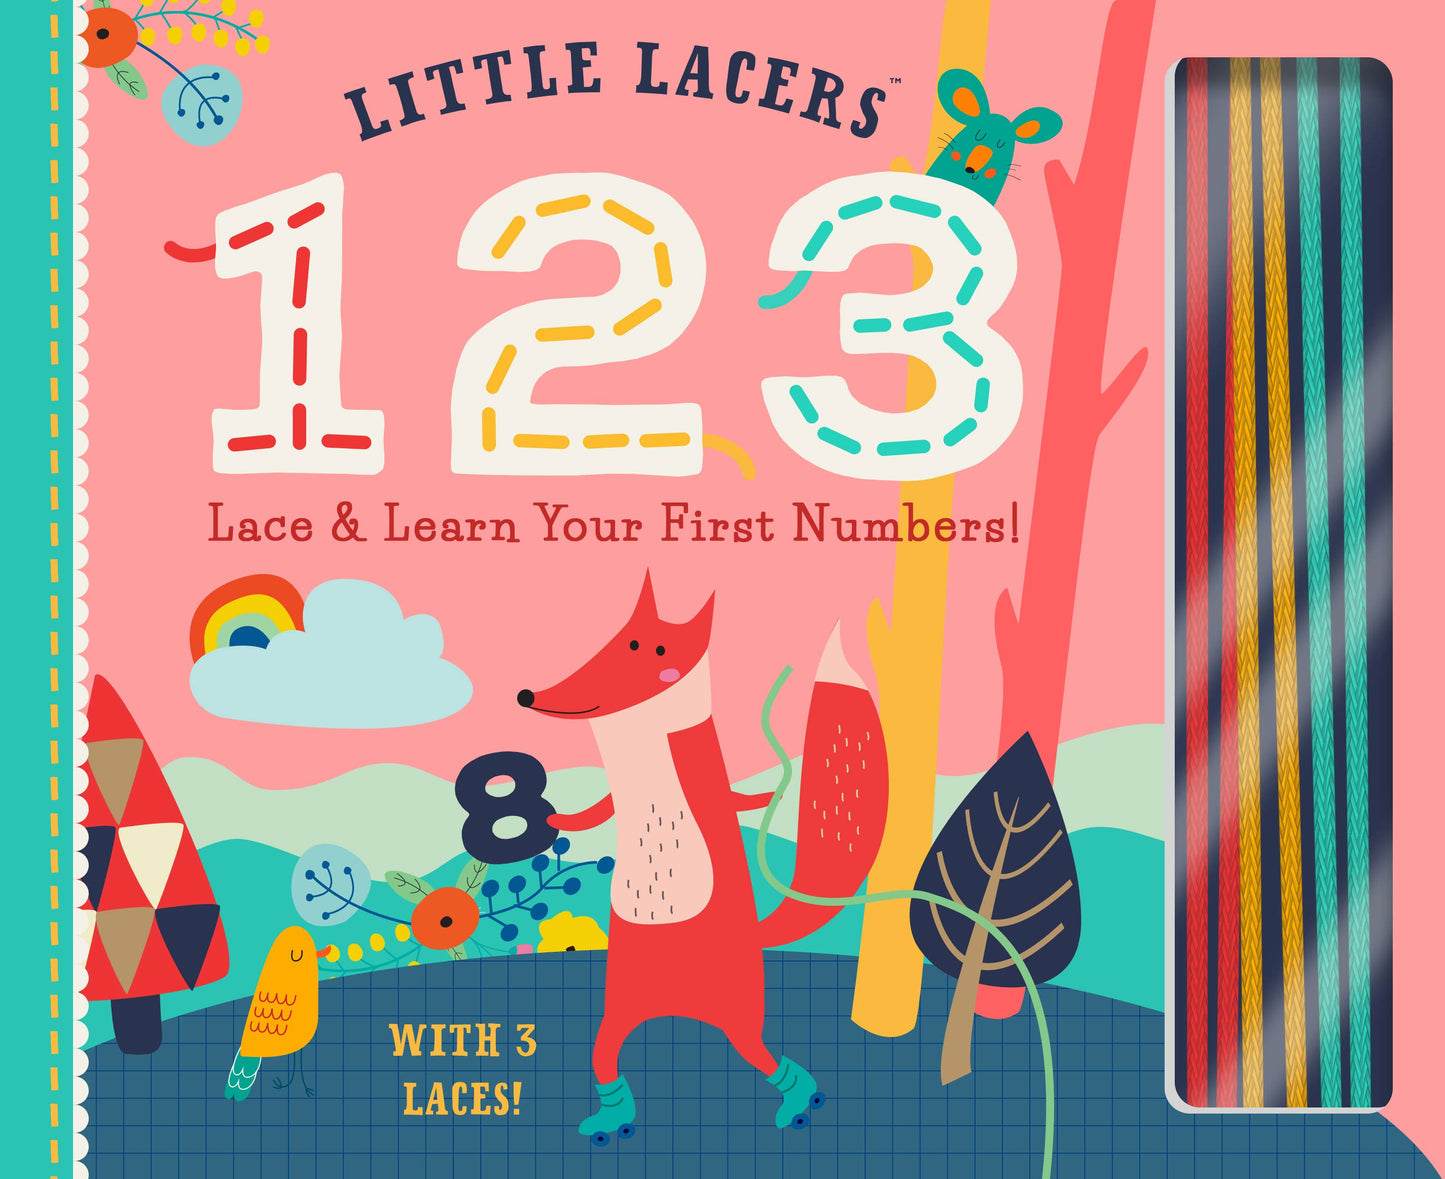 Book (Board) - Little Lacers 123